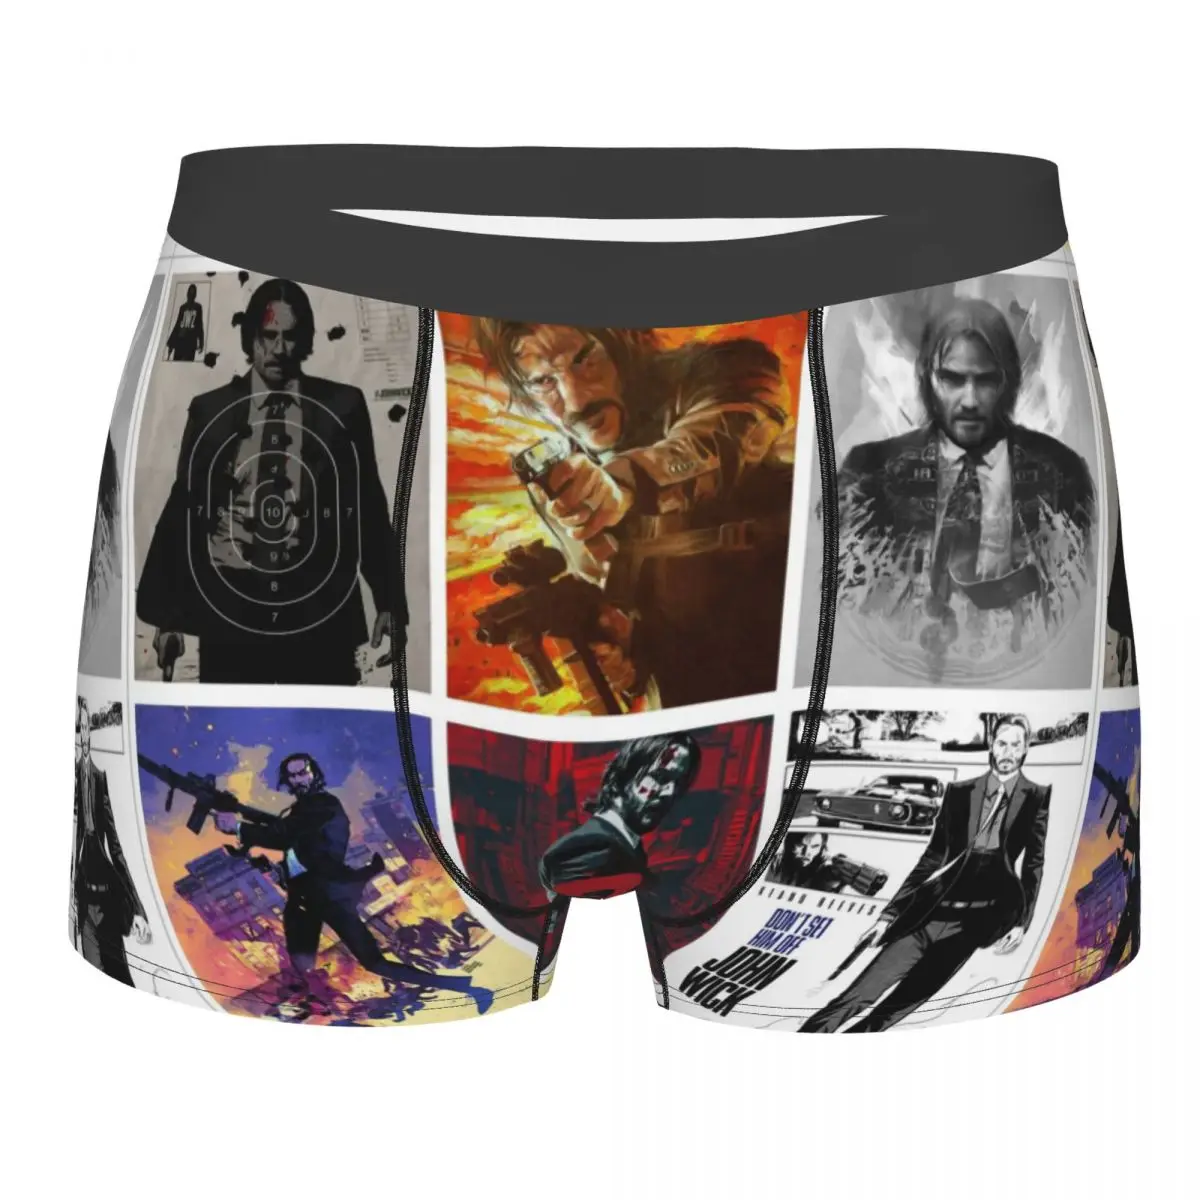 Keanu Reeves John Wick Men's Boxer Briefs Highly Breathable Underpants High Quality 3D Print Shorts Gift Idea